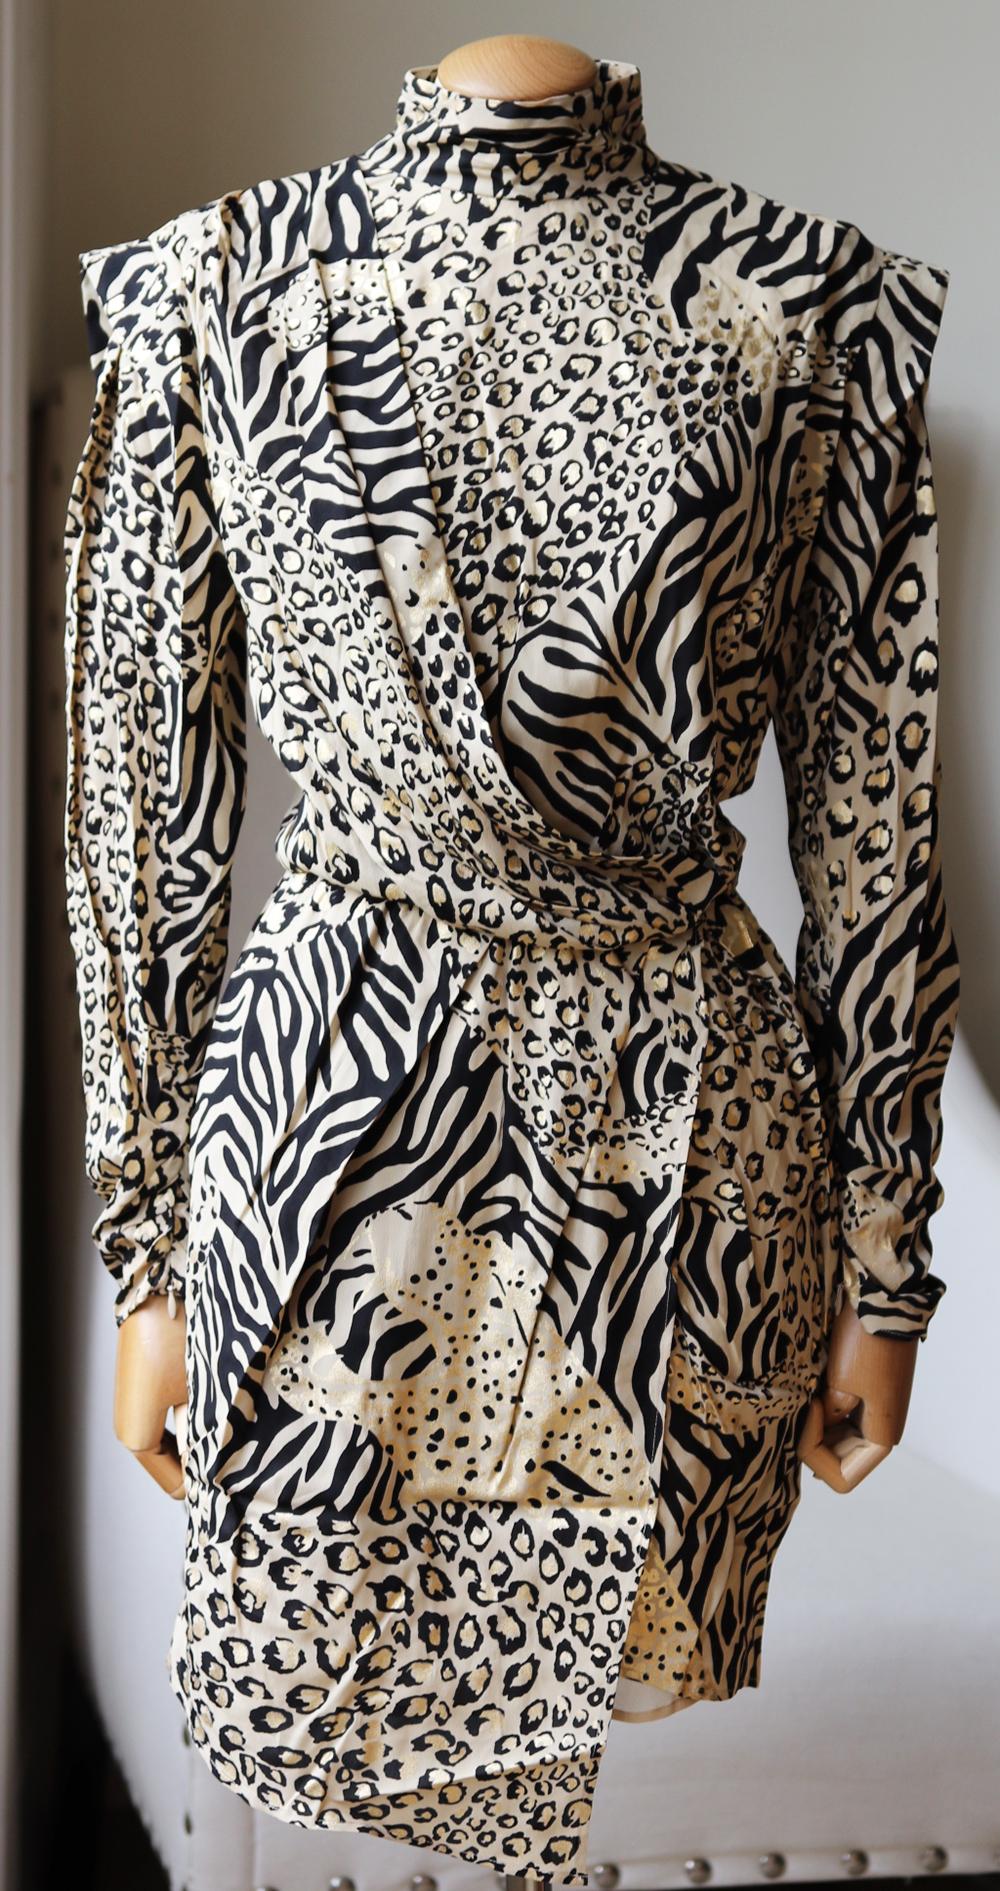 Dundas mini dress is intricately printed with a mix of various animal-prints, most noticeably leopard-spots and zebra-stripes.
This dress combines different structural elements with strong shoulders, a turtleneck collar and a pleated asymmetric